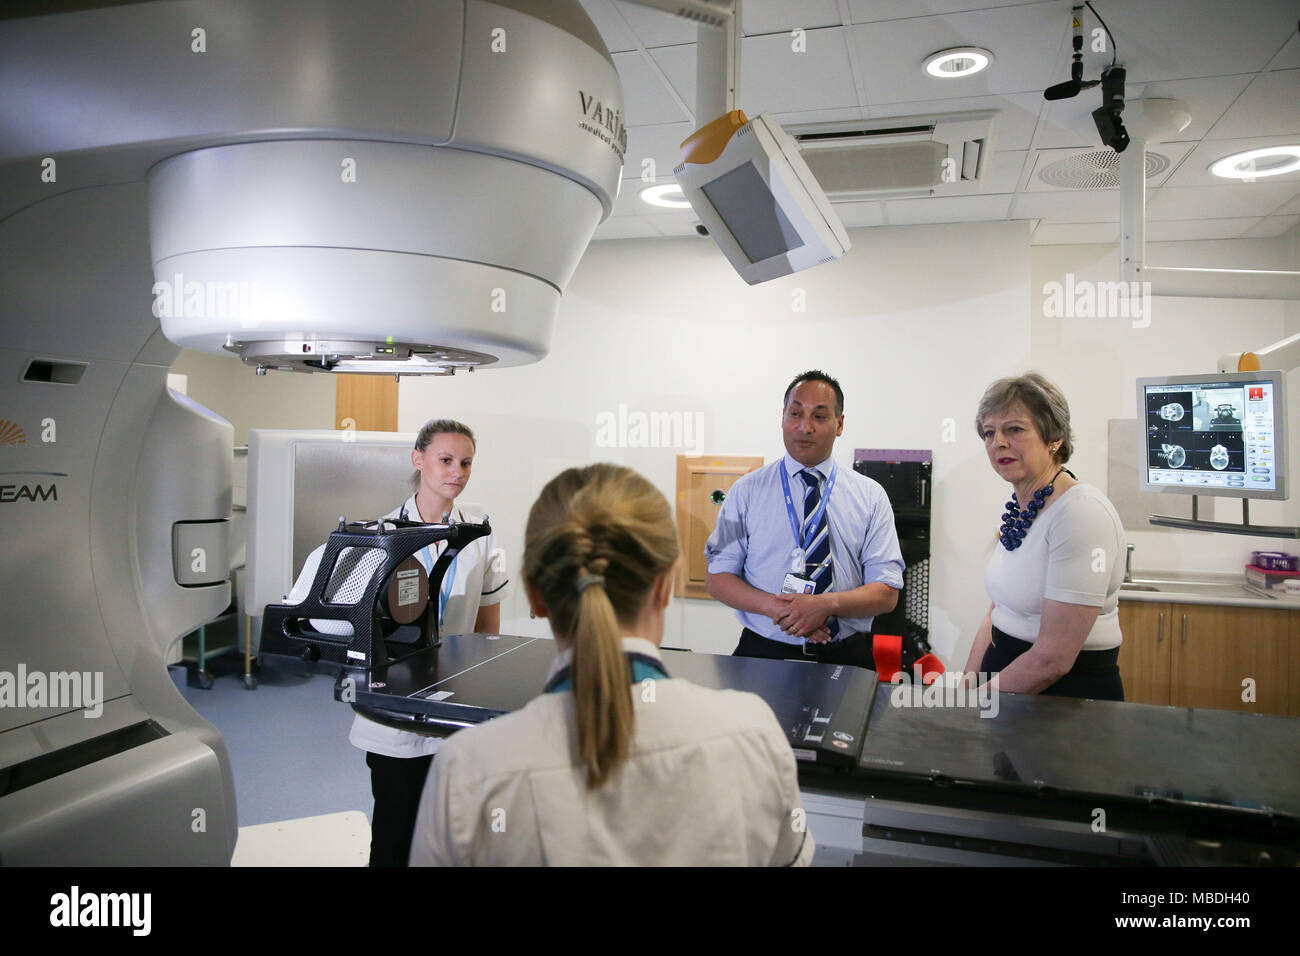 Prime Minister Theresa May (right) is shown the advanced radiotherapy system during her visit to Addenbrooke's Hospital in Cambridge, where she announced new research and funding for prostate cancer treatment, and met NHS staff to discuss the challenges they face as the Government prepares to bring forward a long-term plan for the health service. Stock Photo